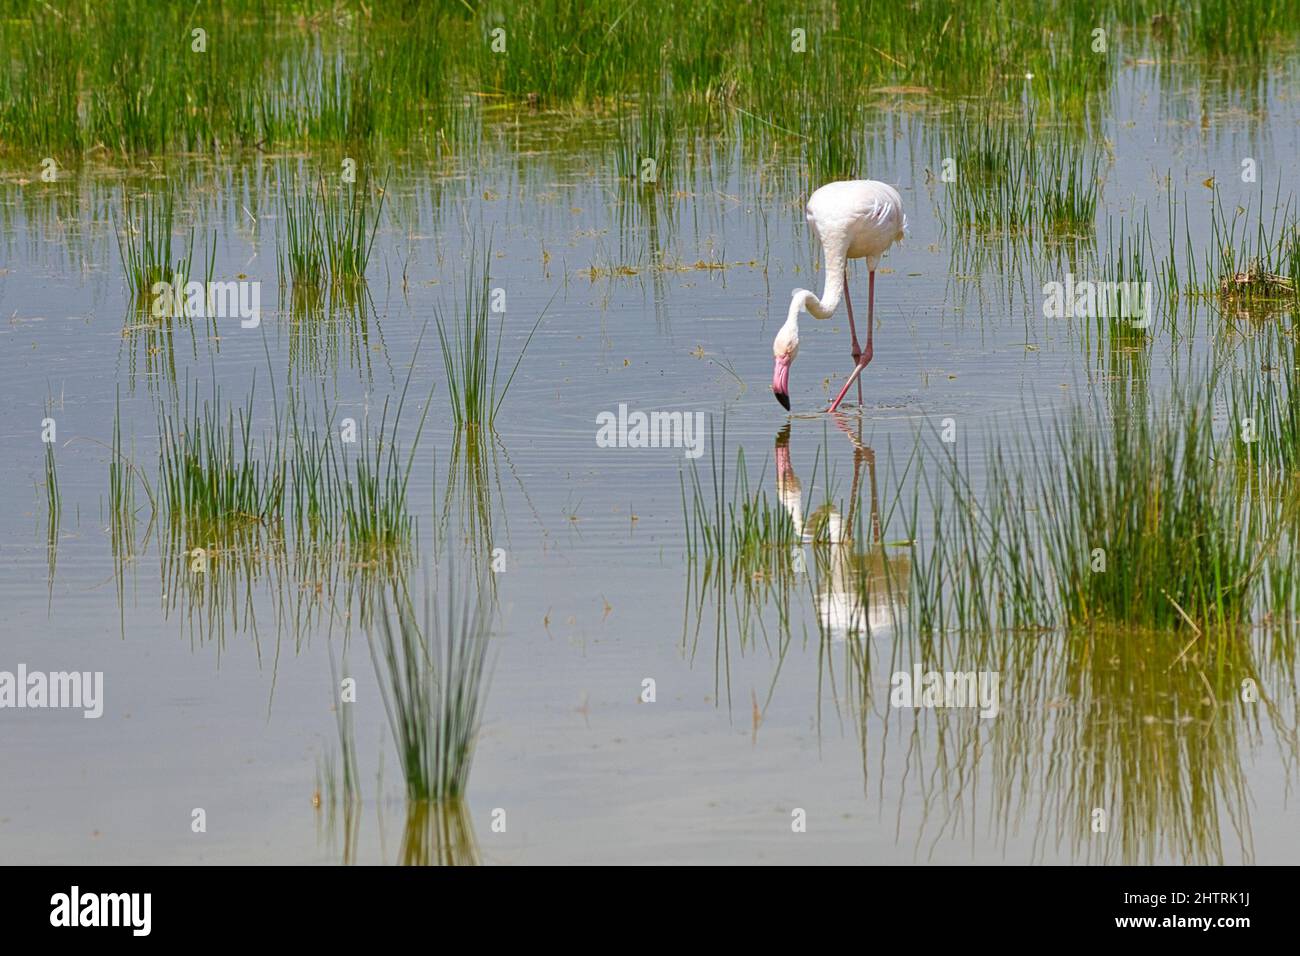 Greater flamingo, Phoenicopterus roseus, foraging in shallow water. Stock Photo